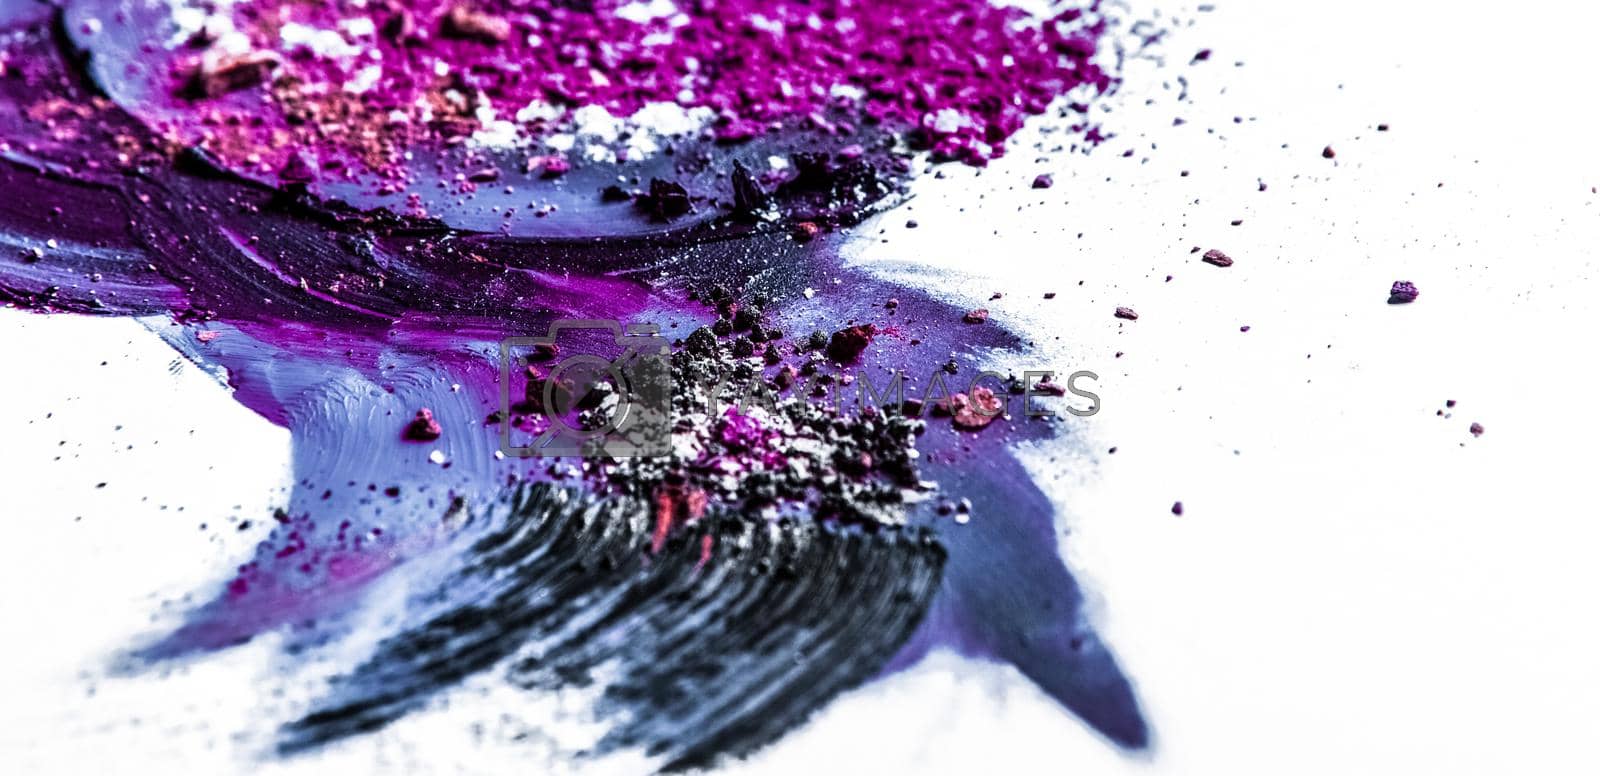 Royalty free image of Artistic lipstick smudge and crushed eyeshadow as background by Anneleven